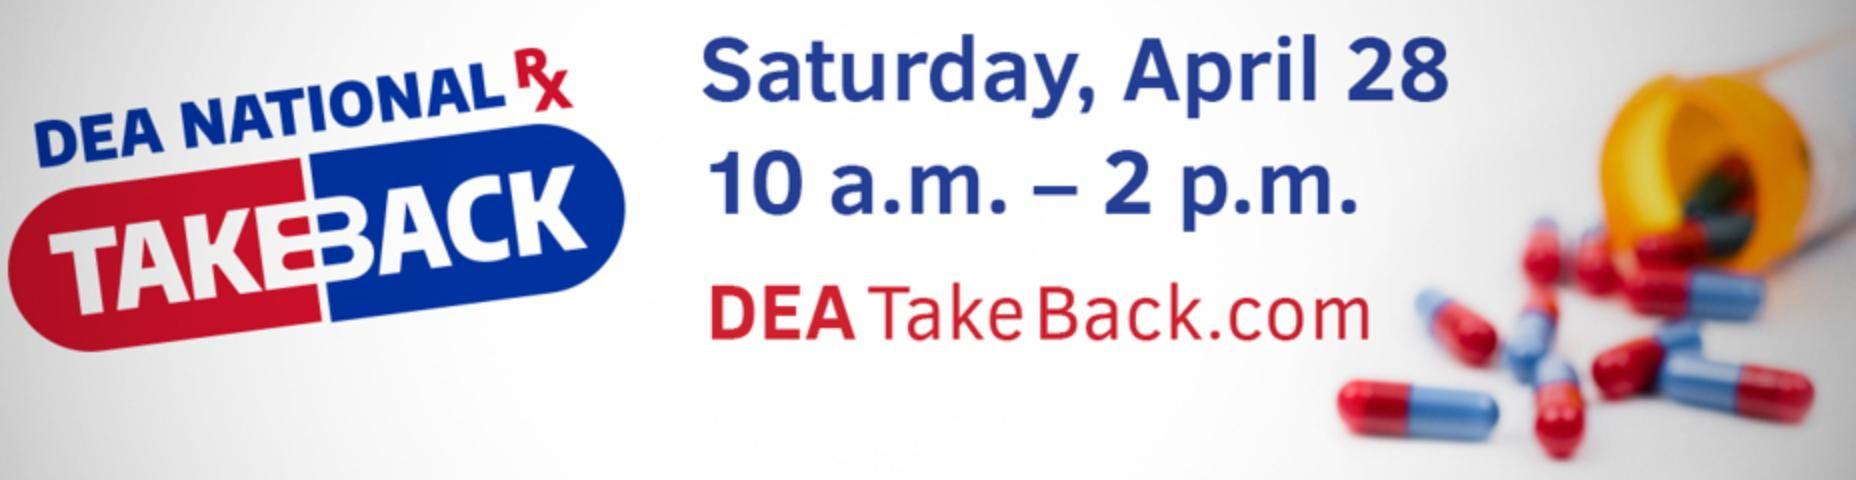 Figure 2. Example of an advertisement for the DEA National Drug Take Back Day.